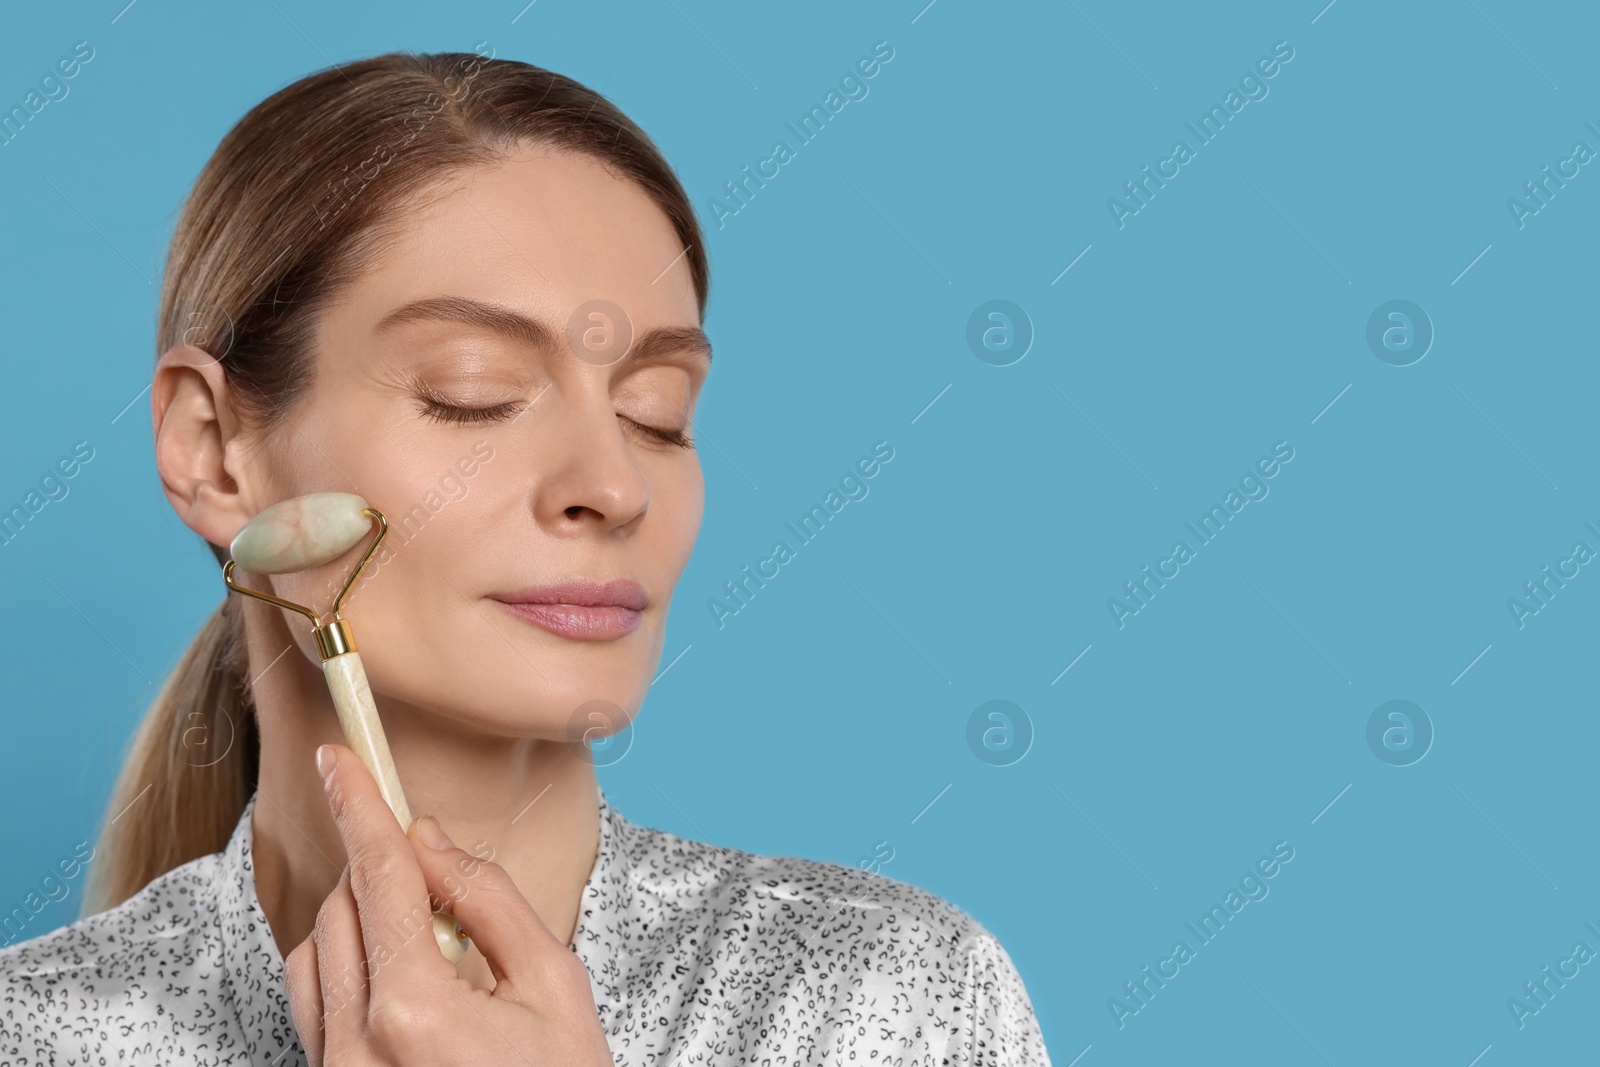 Photo of Woman massaging her face with jade roller on turquoise background. Space for text